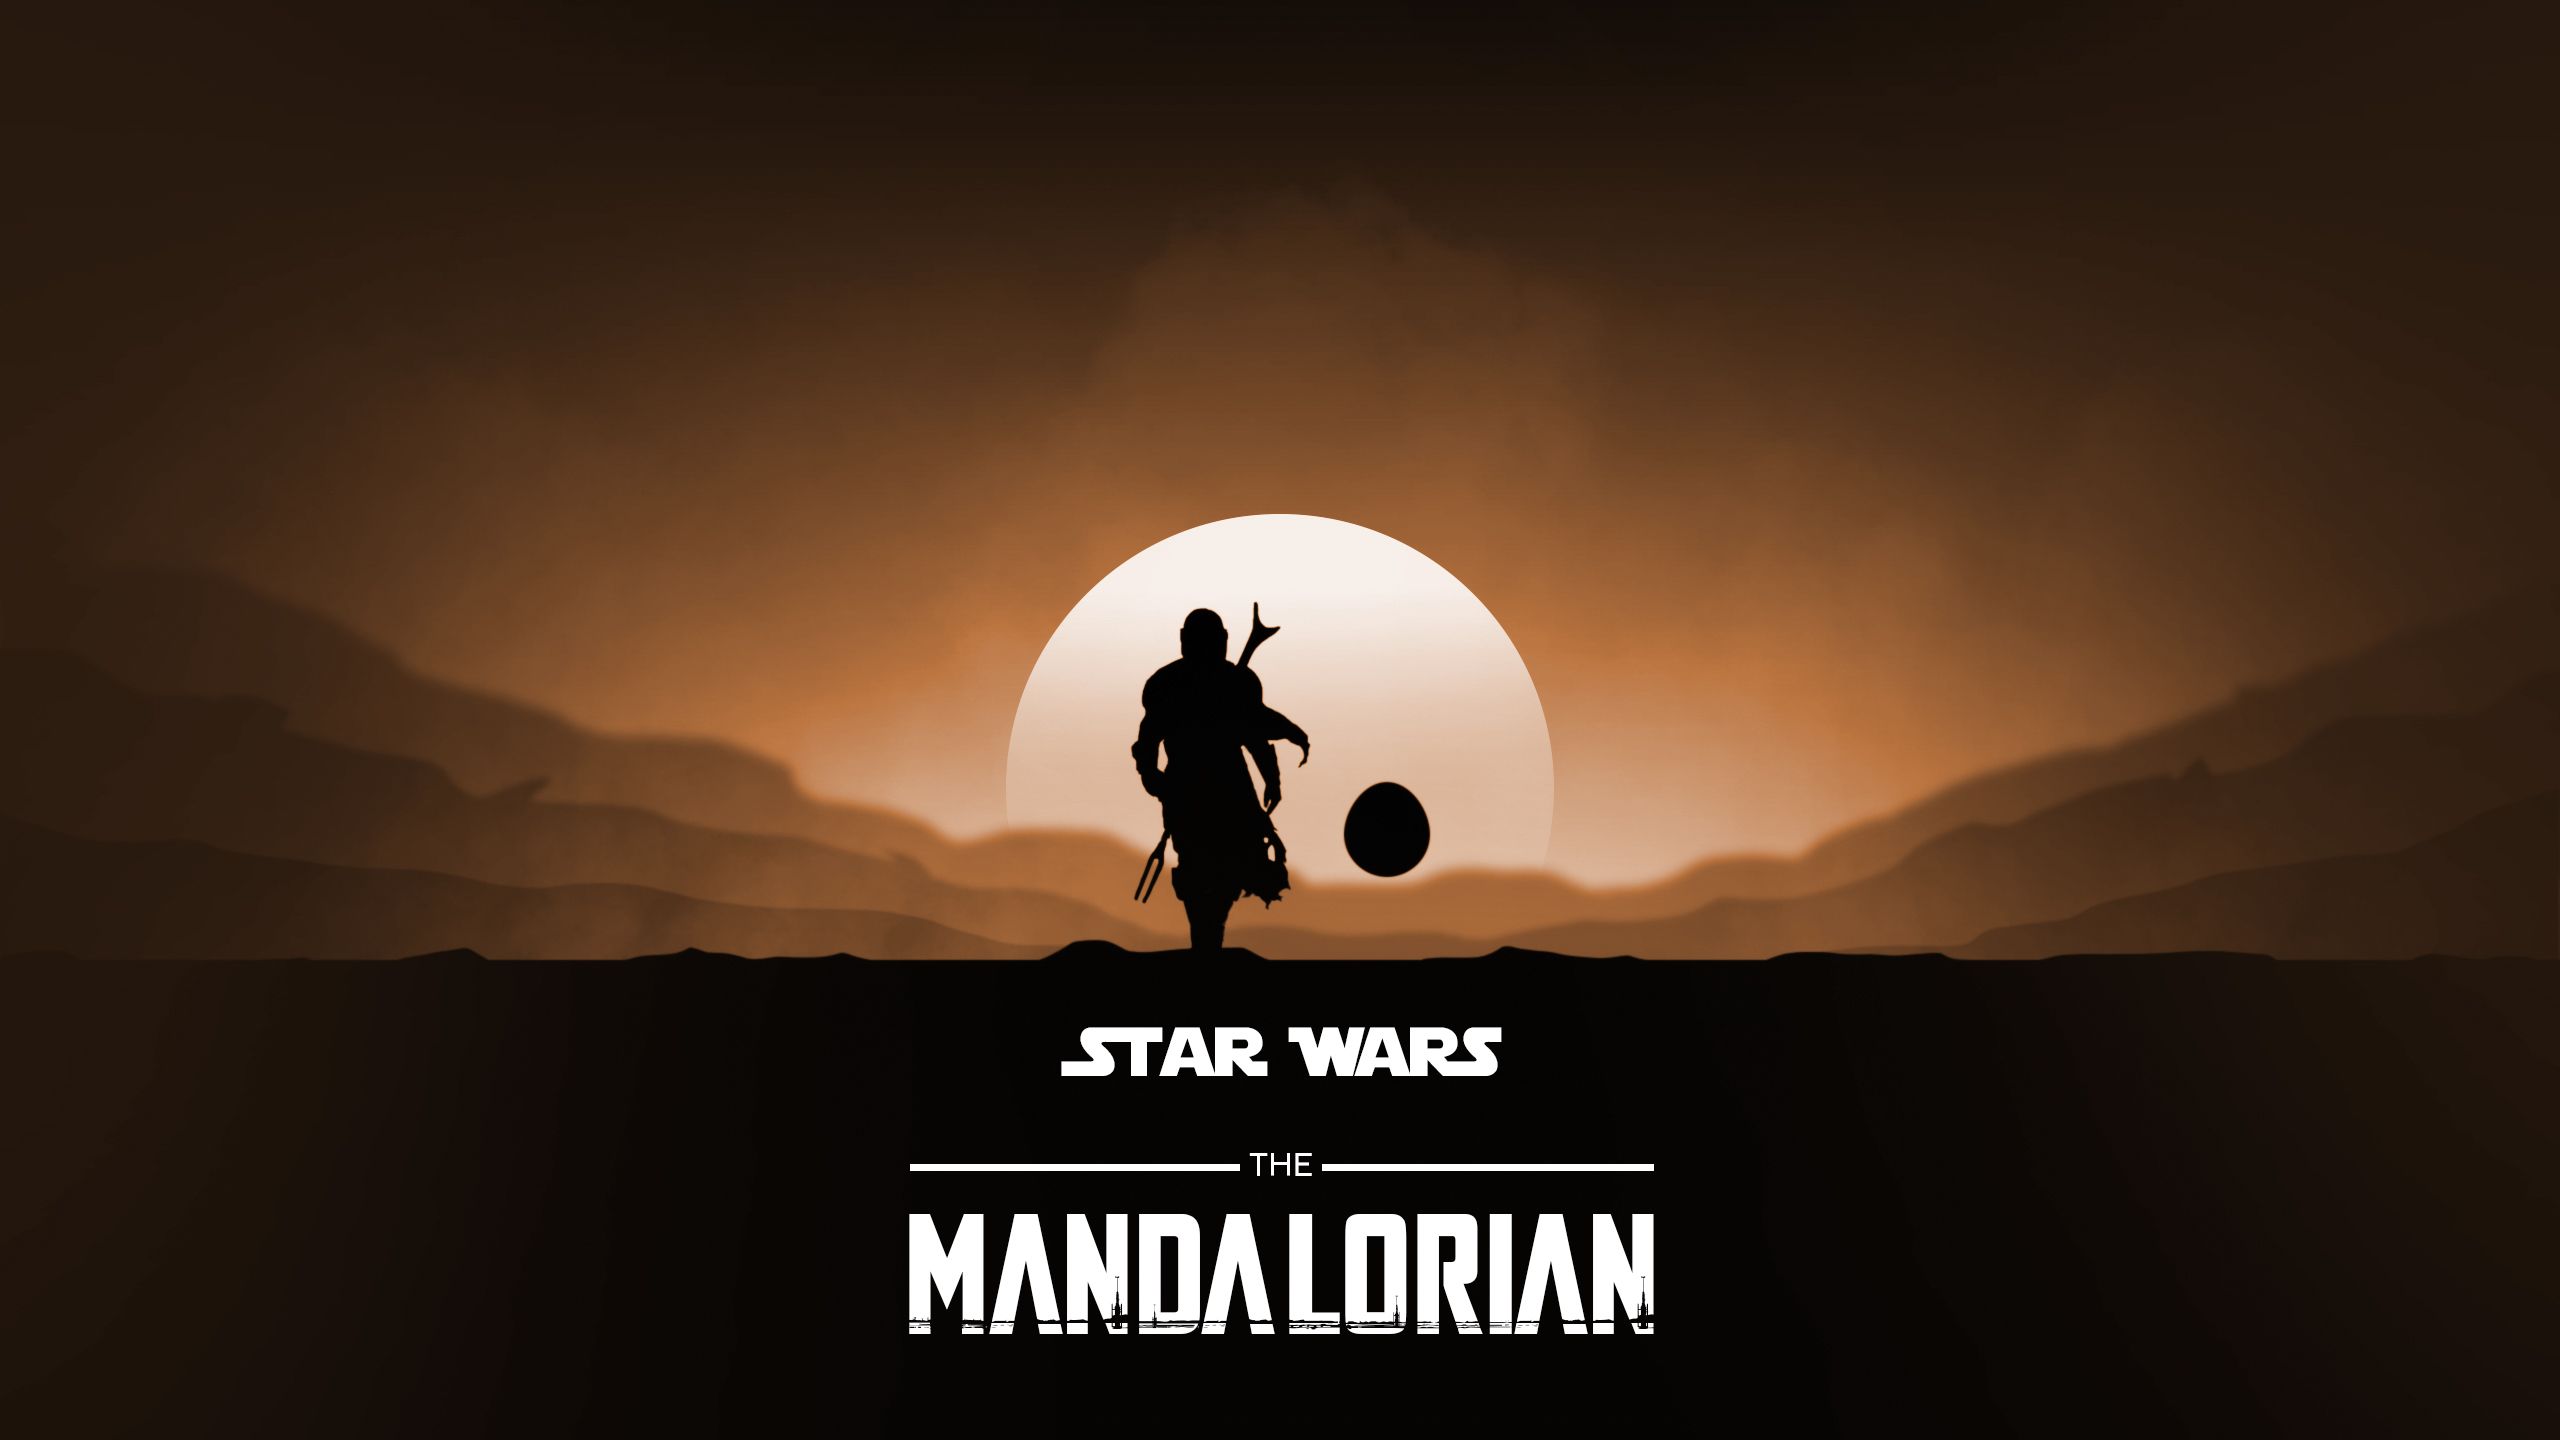 The Mandalorian Yoda HD Tv Shows, 4k Wallpaper, Image, Background, Photo and Picture